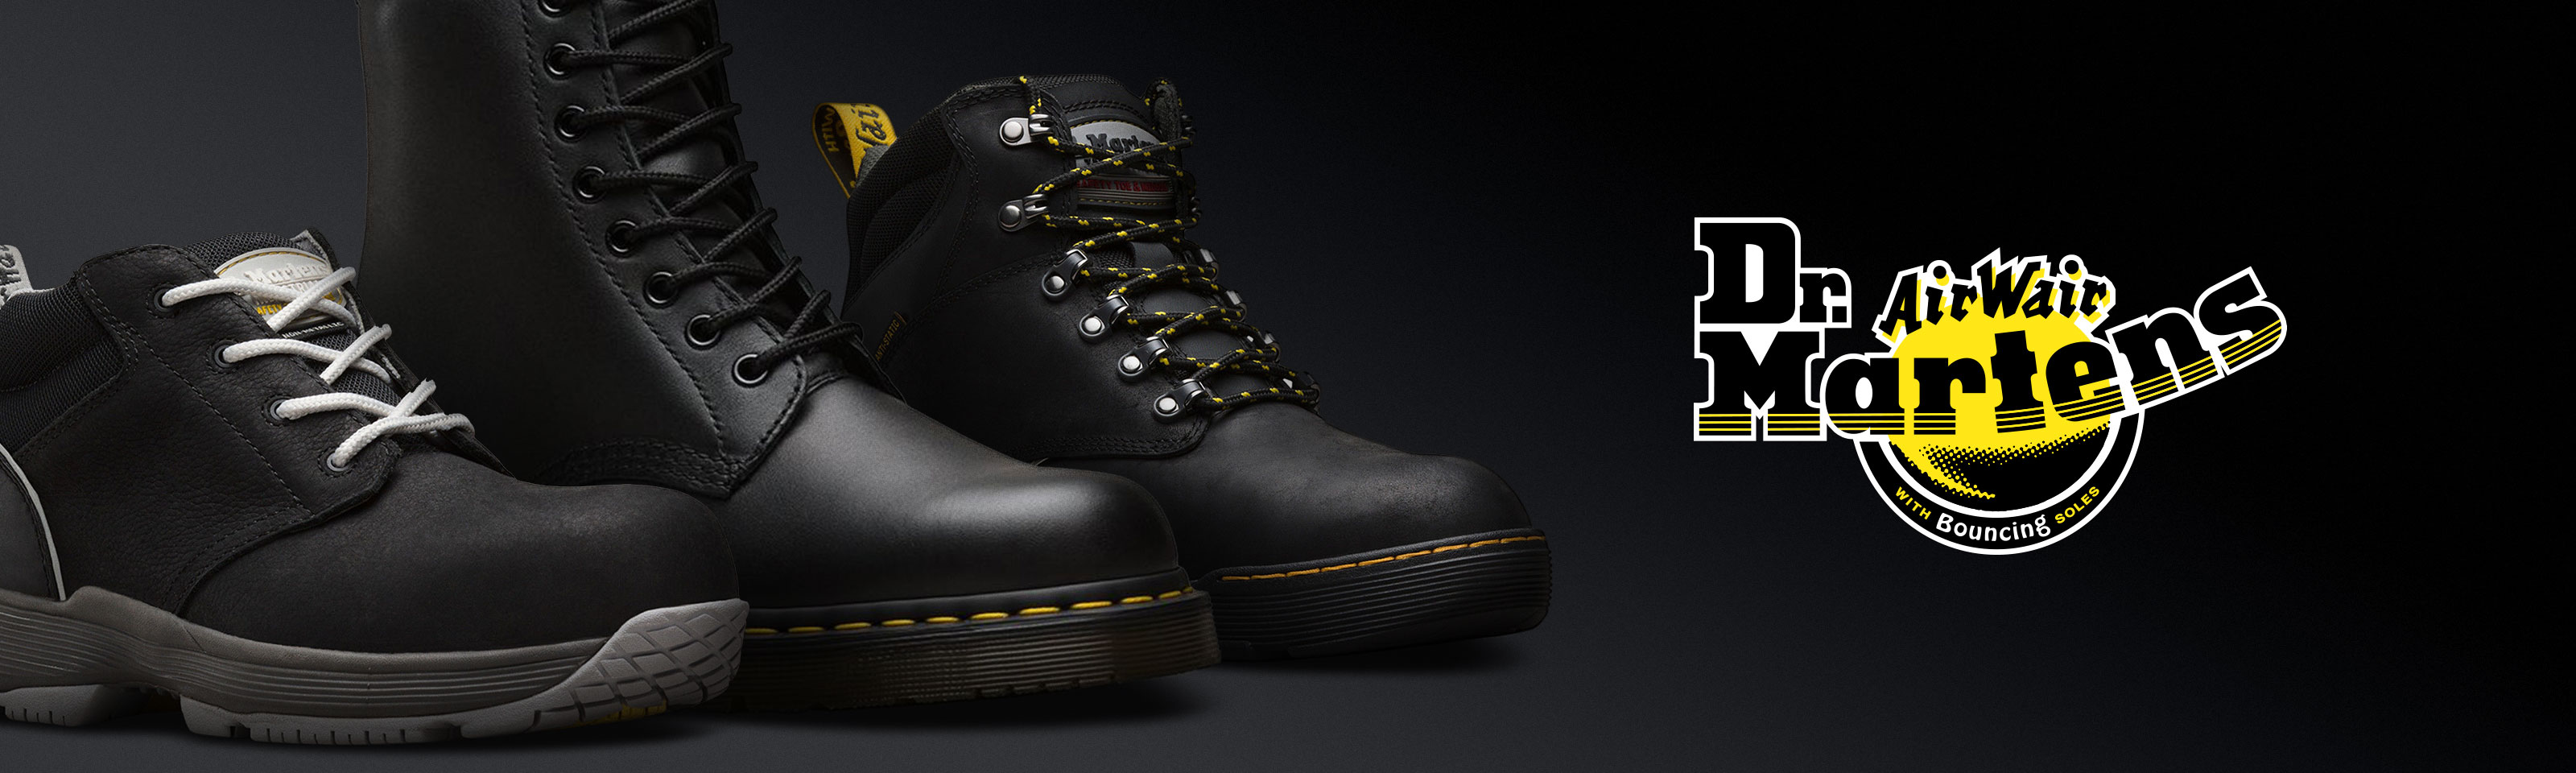 Dr Martens Safety Boots and Shoes